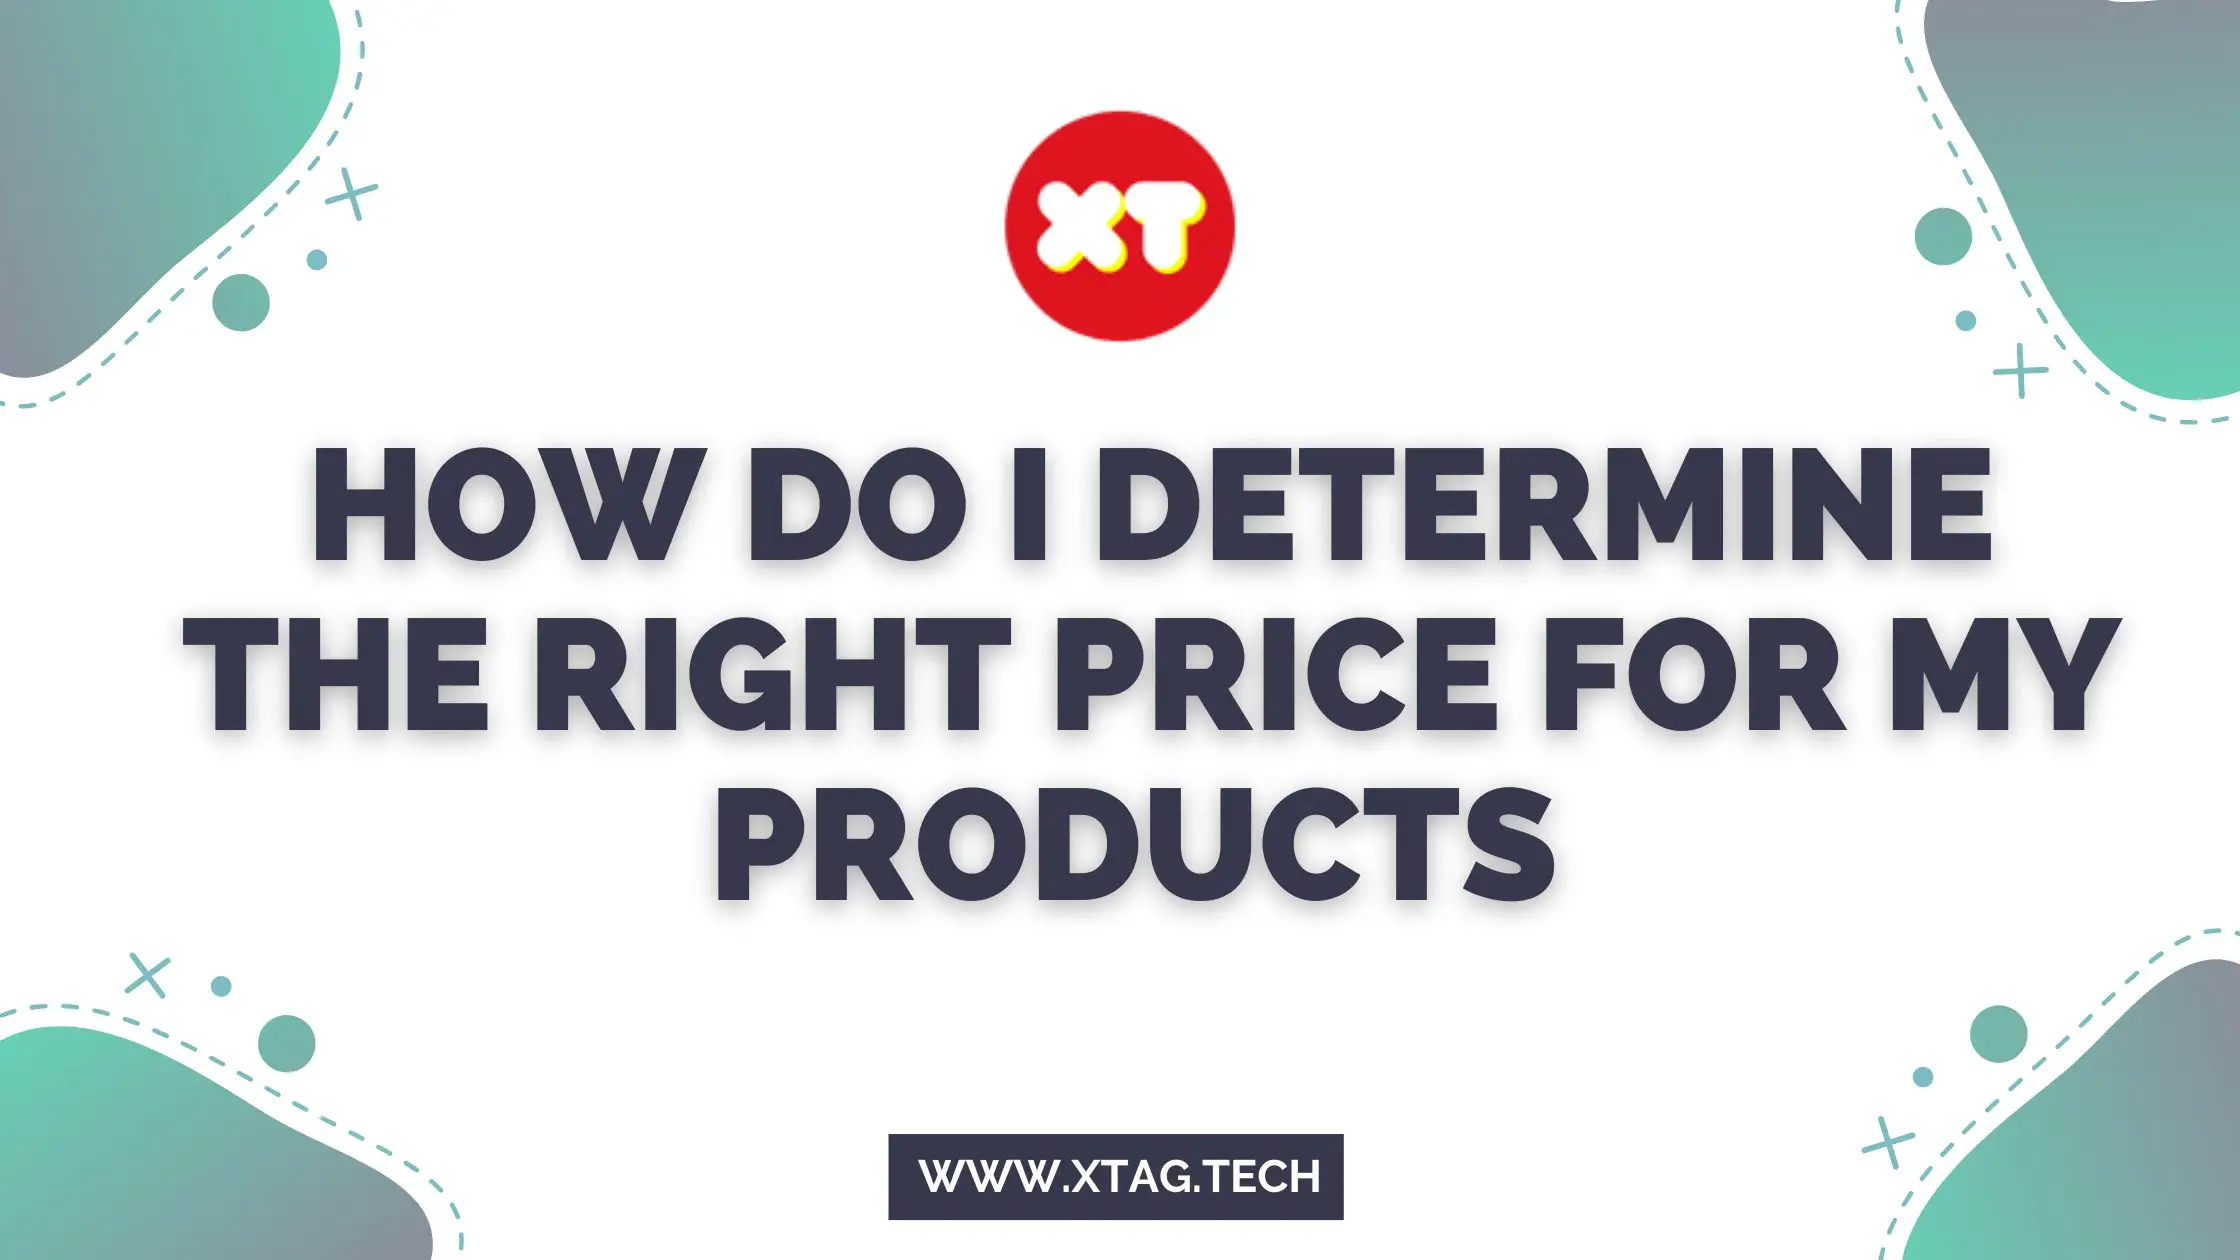 How Do I Determine The Right Price For My Products To Attract Buyers And Ensure Profit?